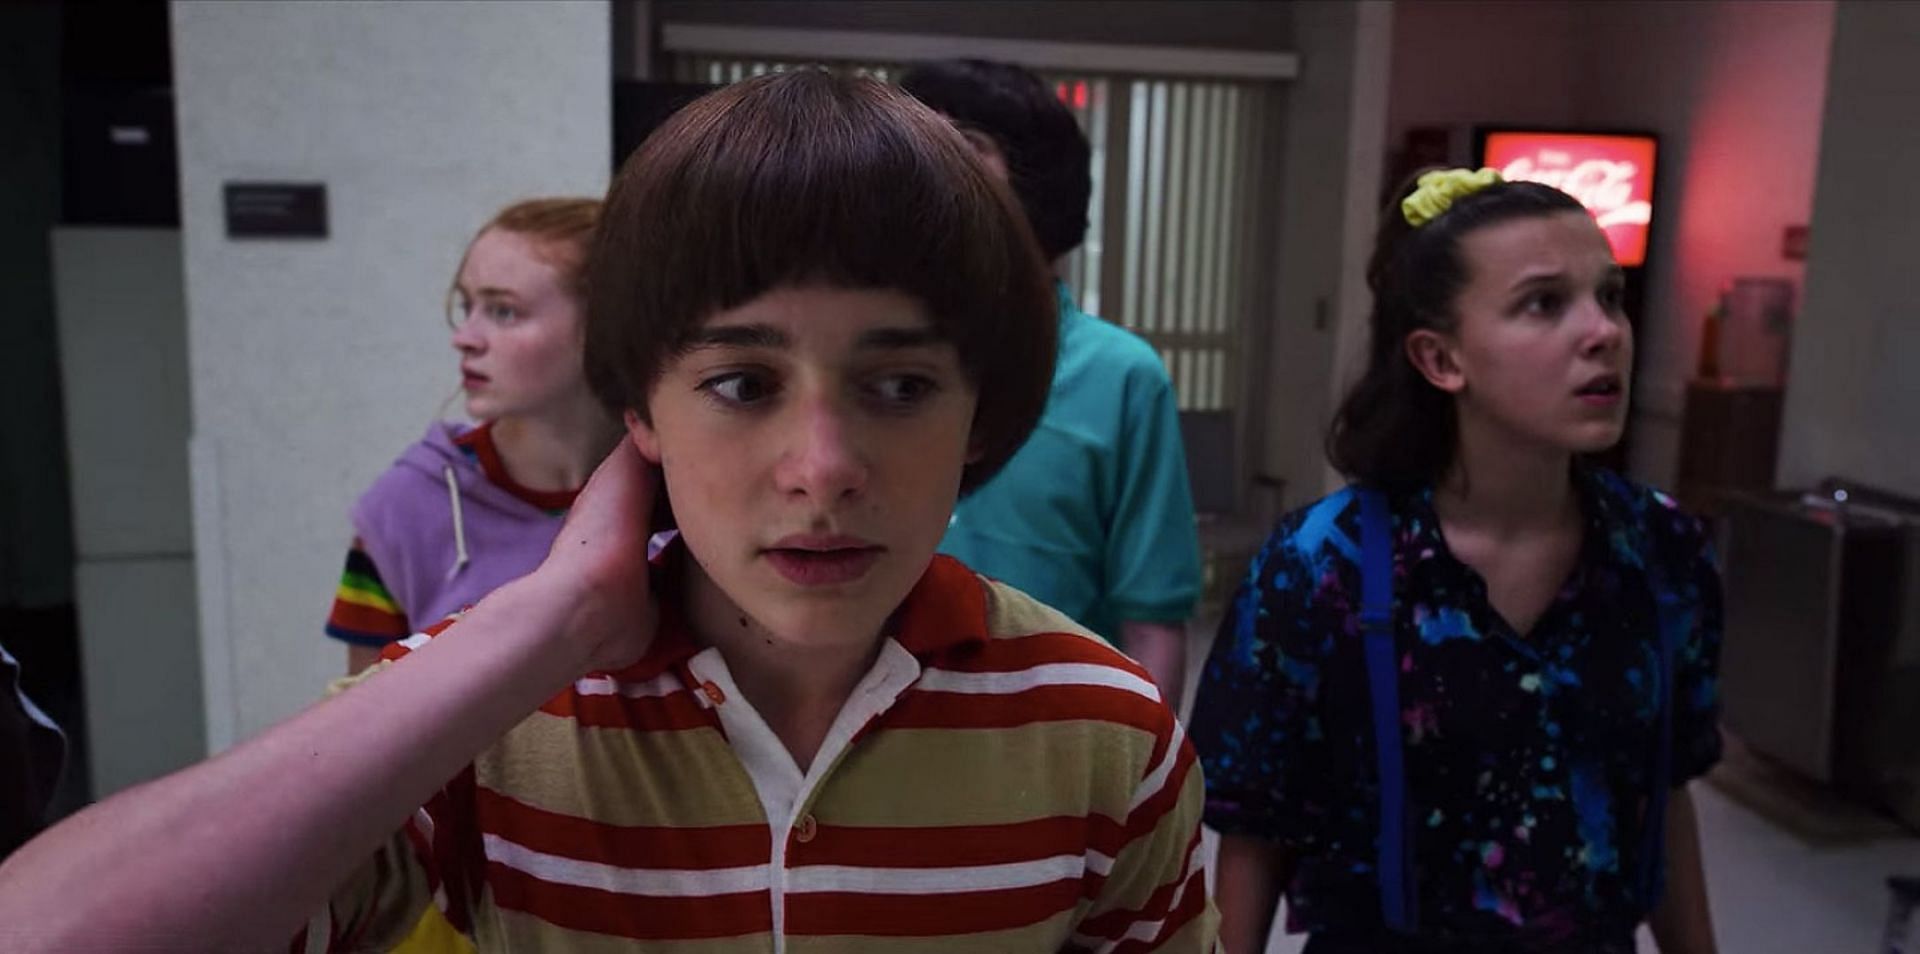 Noah Schnapp Confirms Will Byers' Sexuality On 'Stranger Things